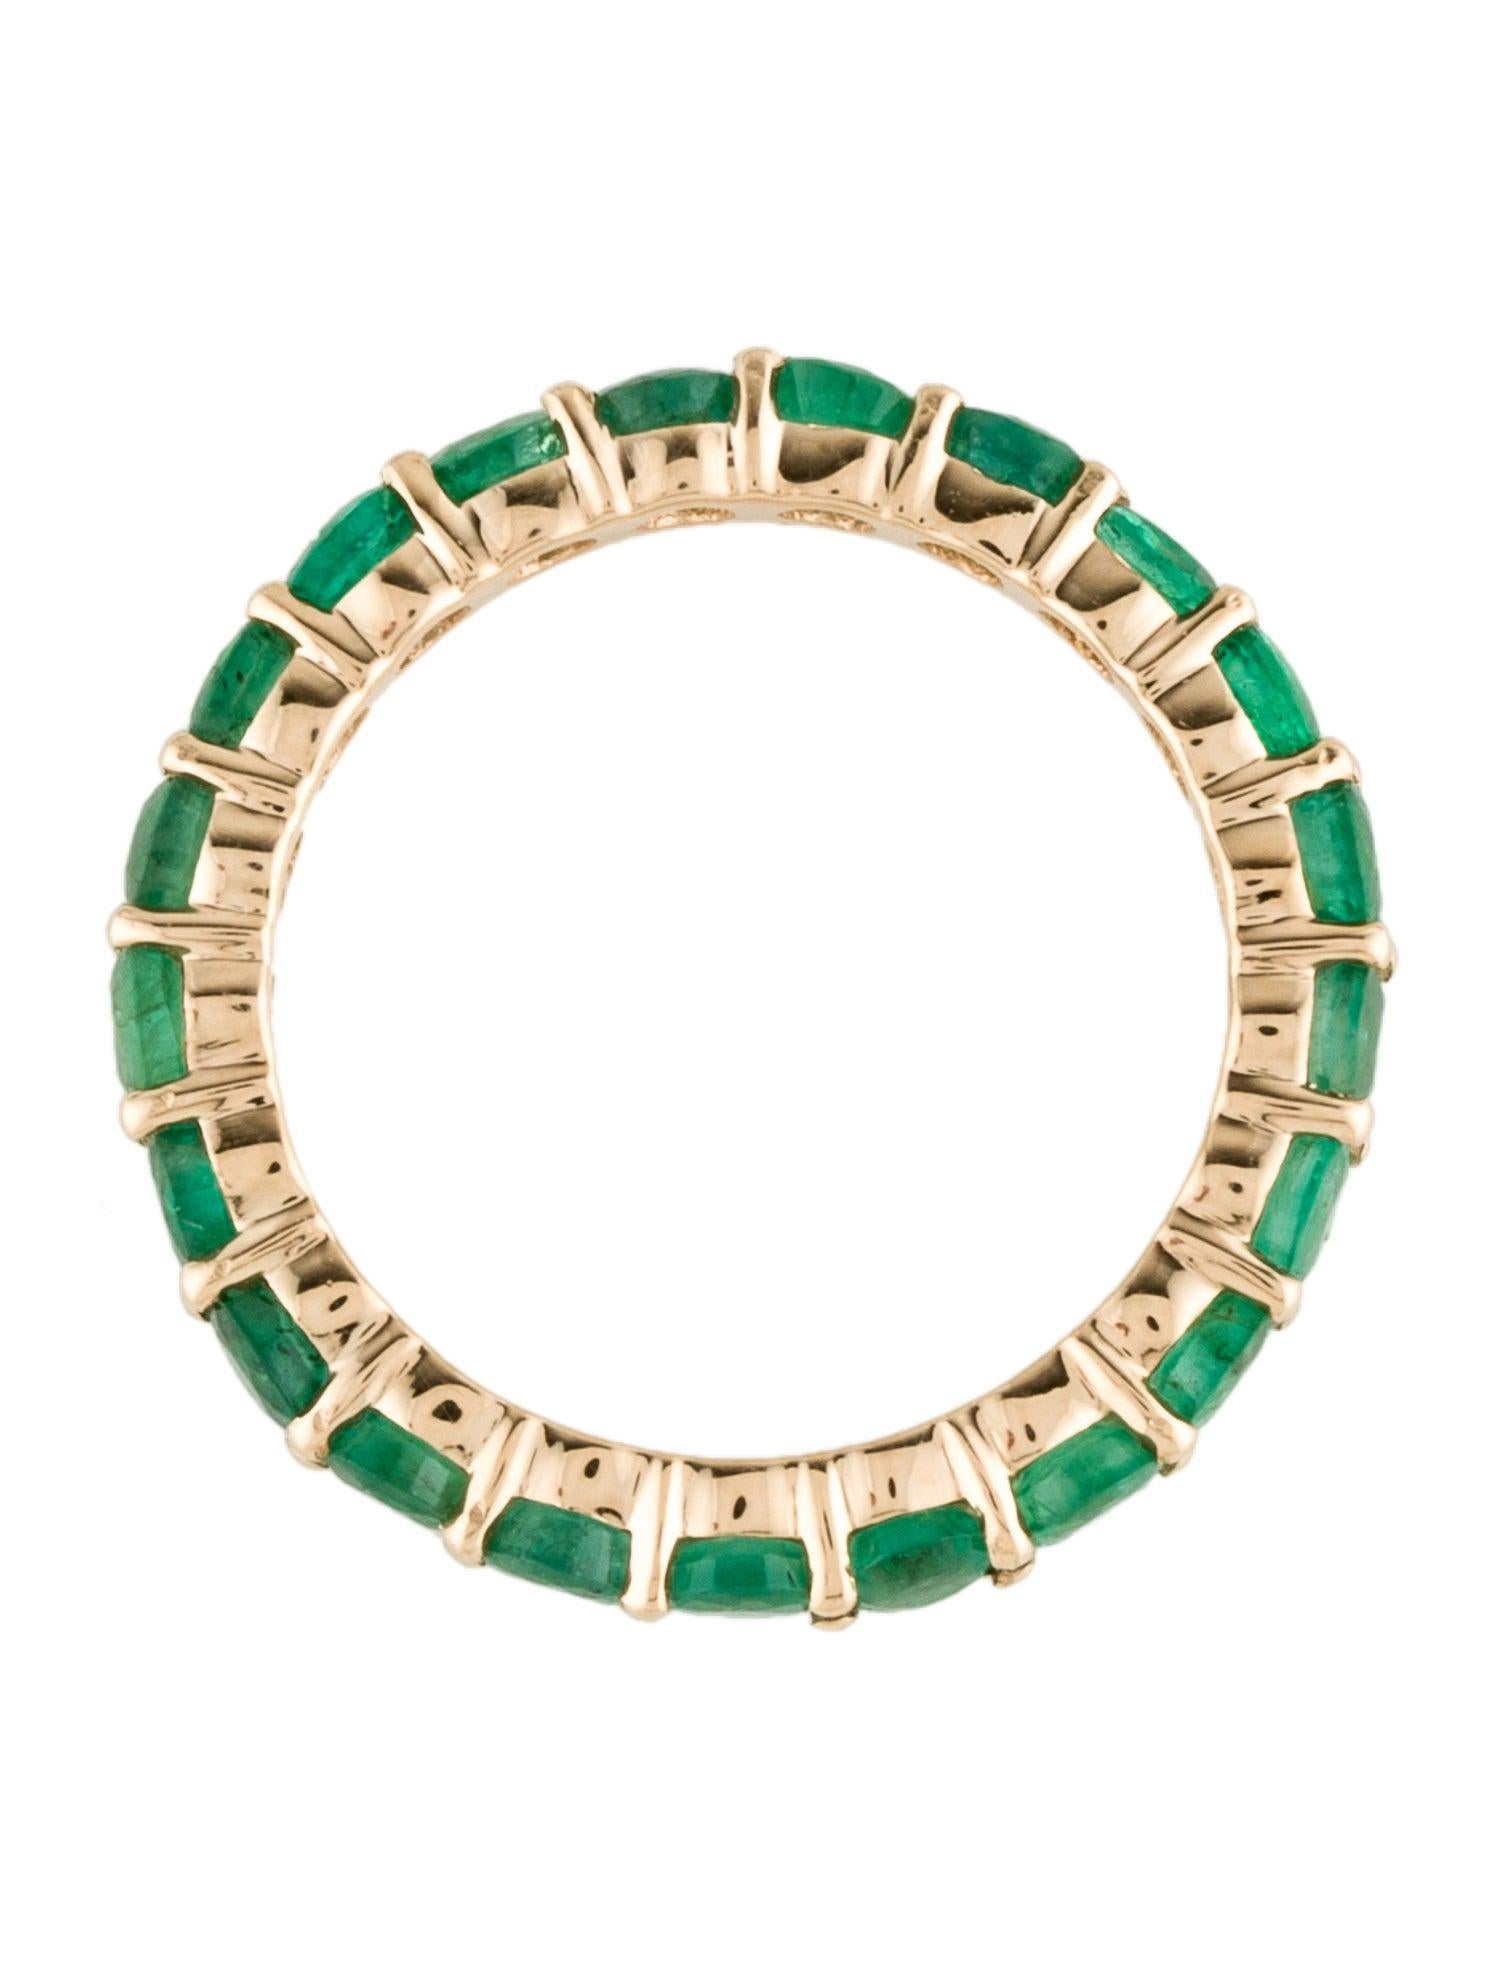 Exquisite 14K Emerald Eternity Band Ring 1.66ctw - Size 6.75 - Timeless Luxury In New Condition For Sale In Holtsville, NY